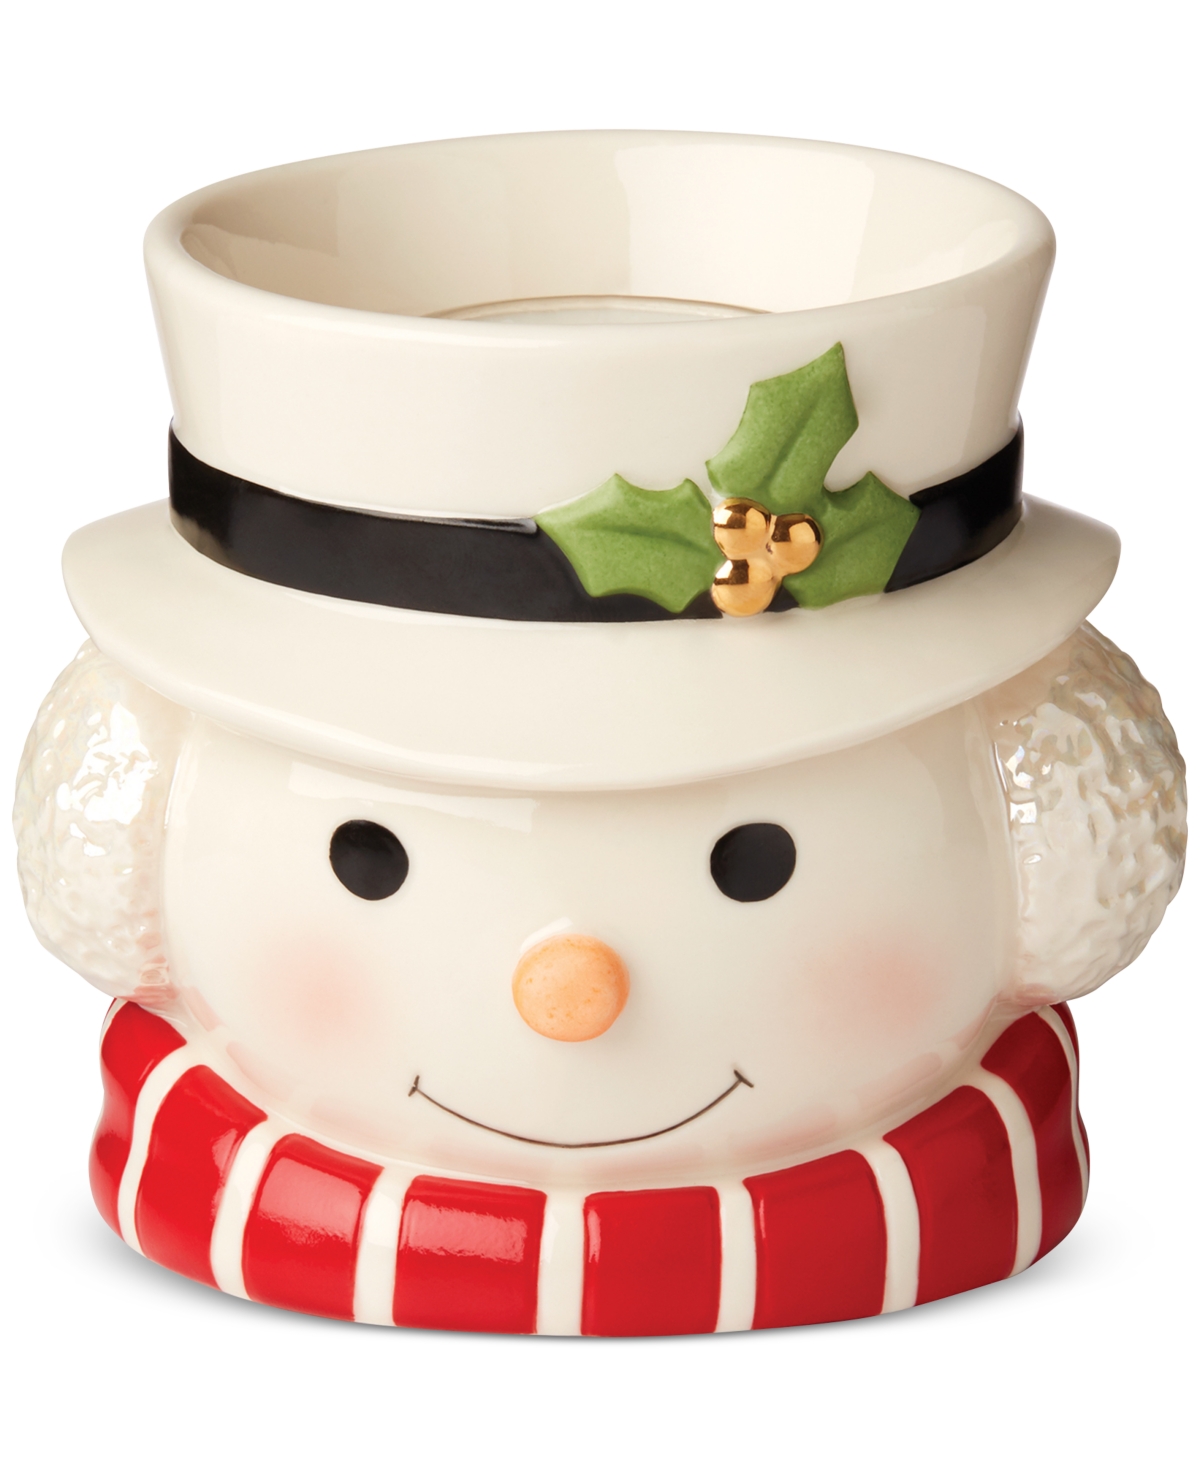 Lenox Snowman Figural Porcelain Tealight Candle Holder In Multi And White